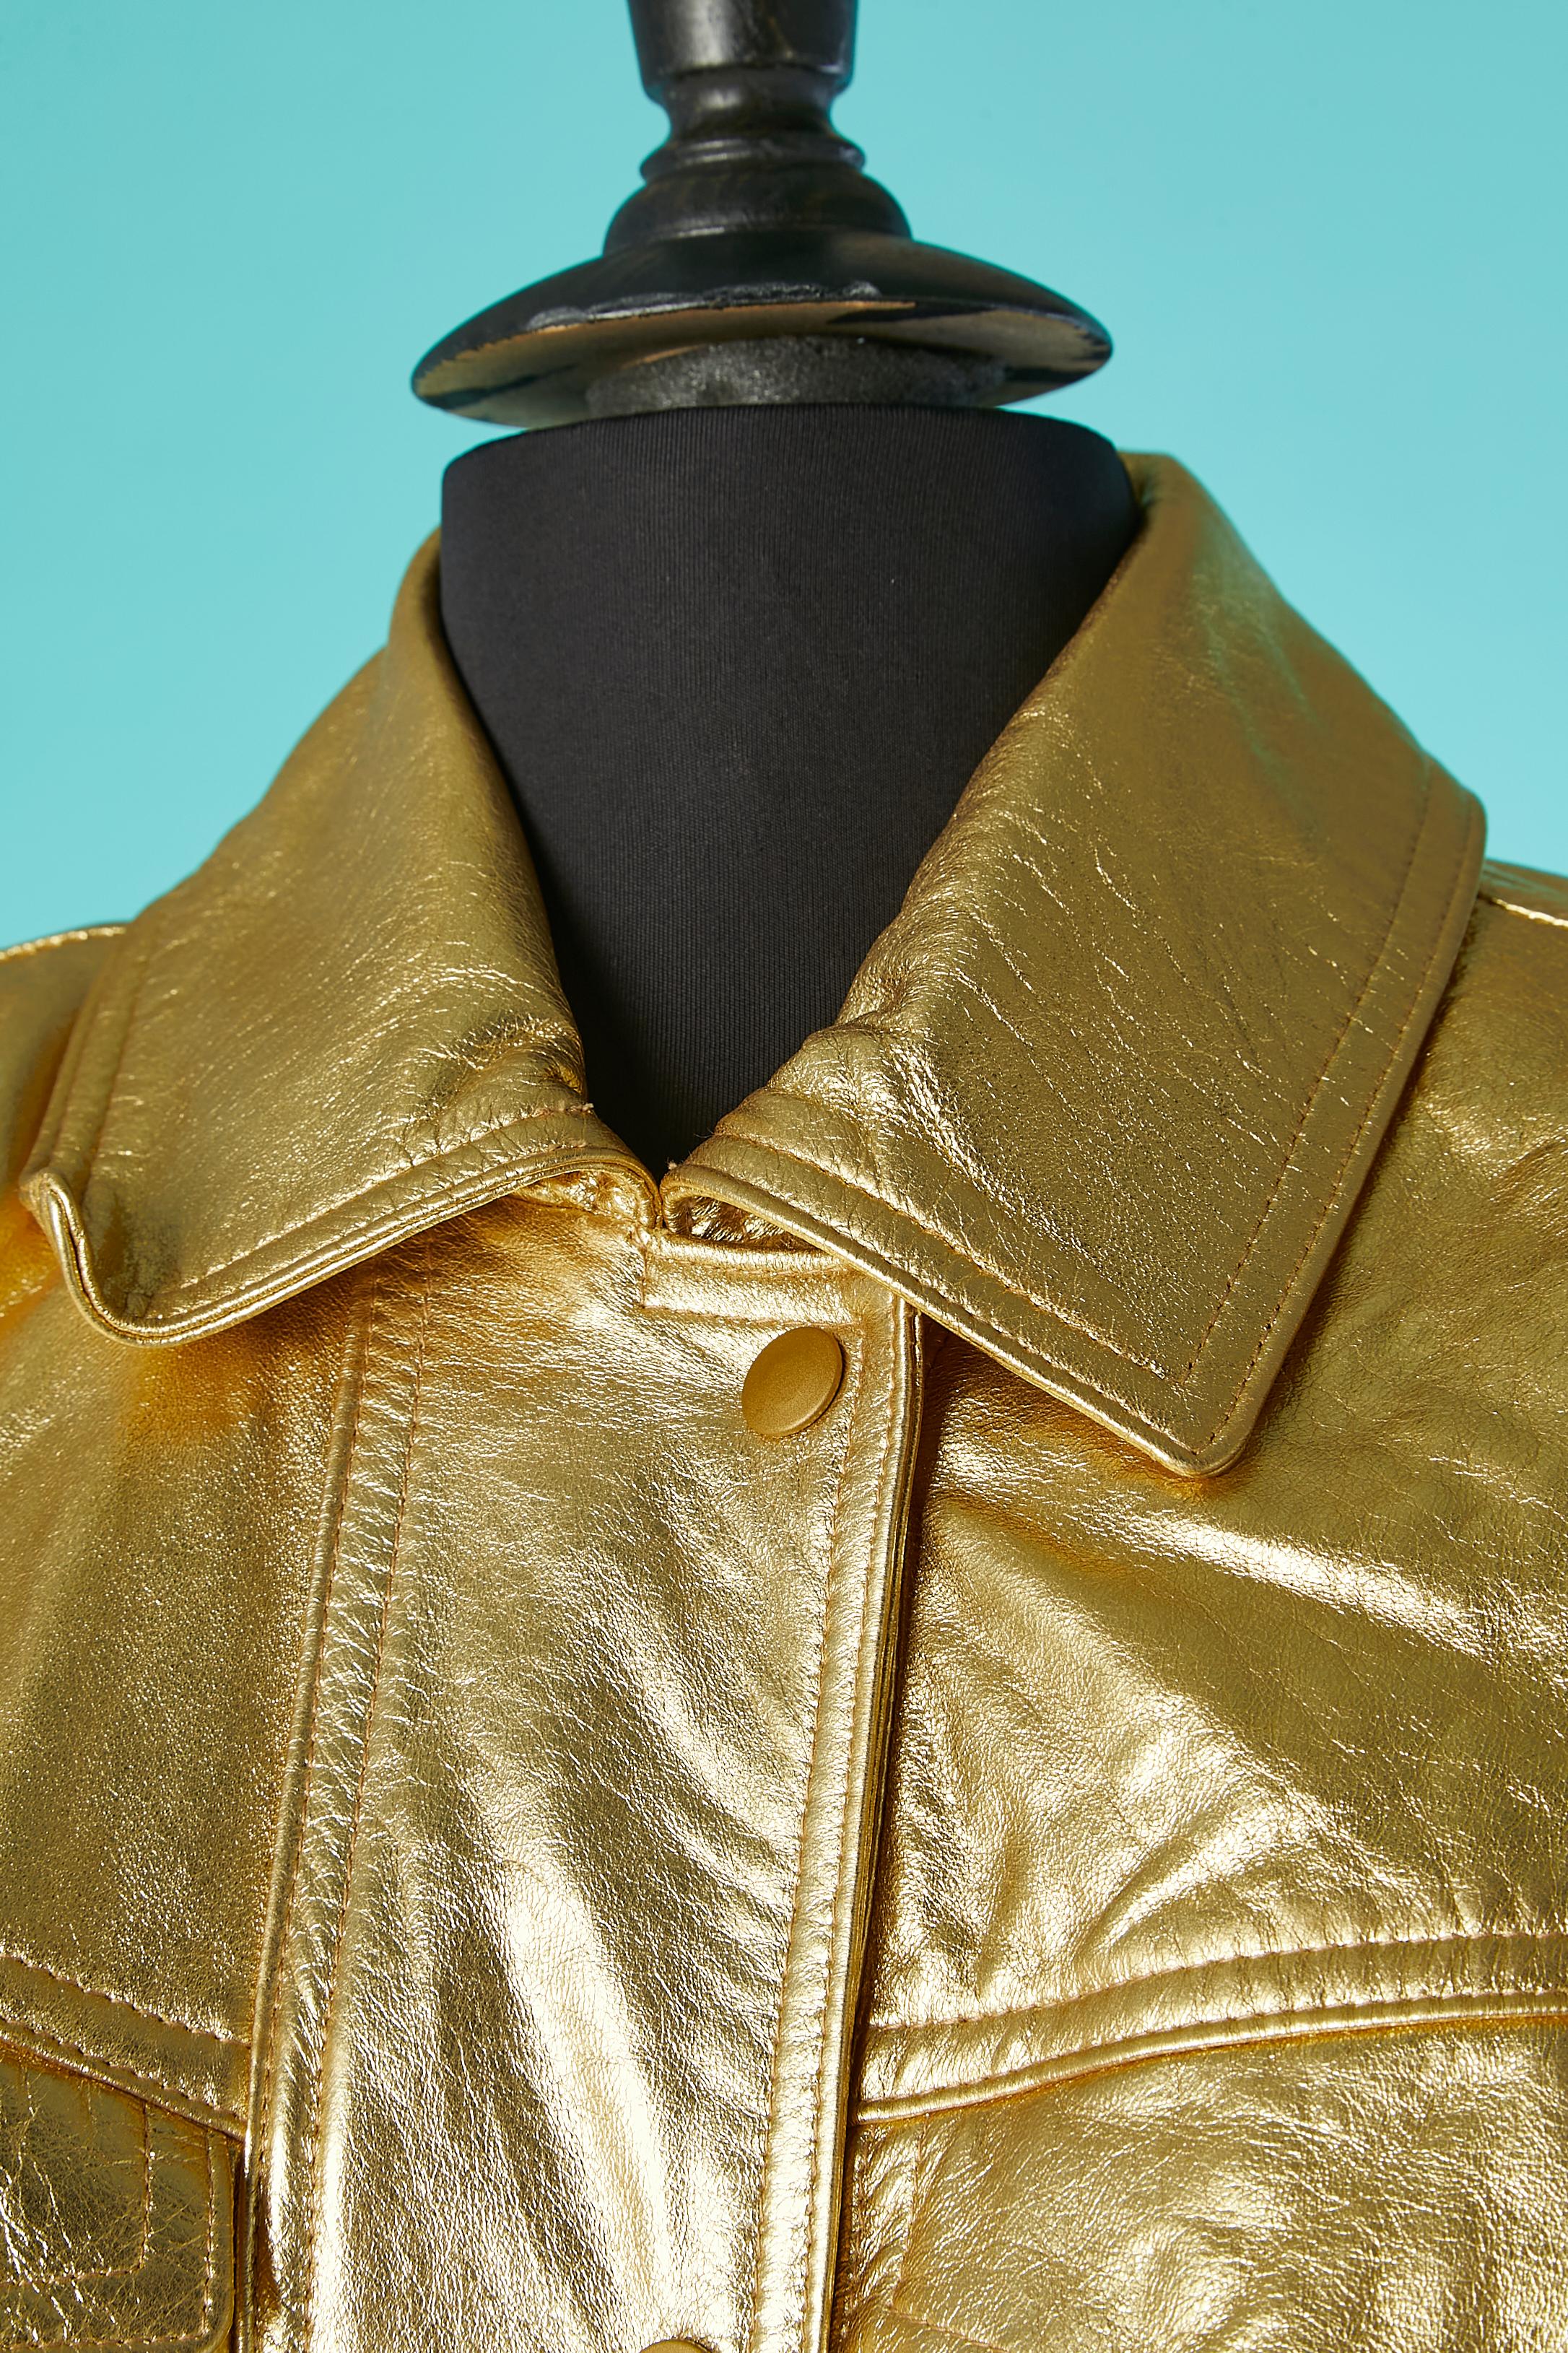 Gold leather skirt-suit. Snap closure in the middle front. Larges shoulder-pads. 
No fabric tag but probably acetate lining. 
SIZE 10 (US) 